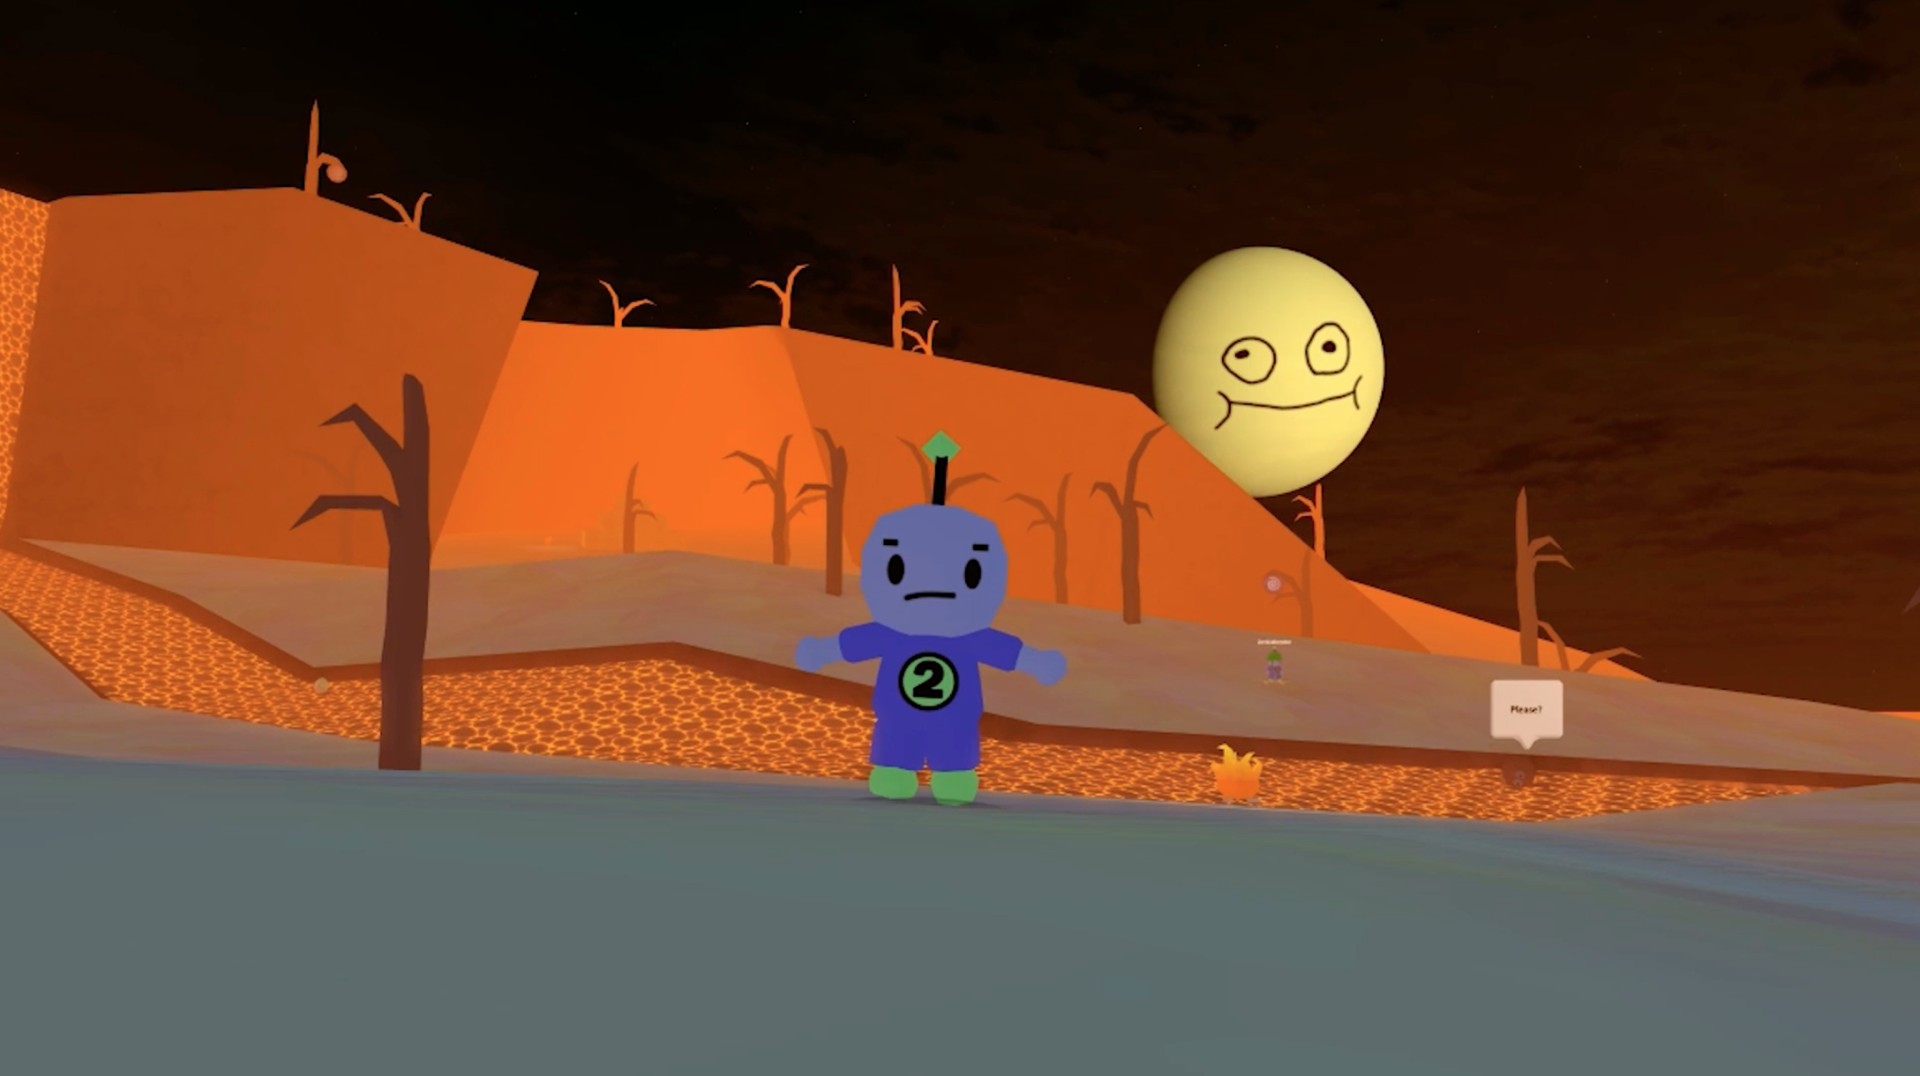 3d Platformer Robot 64 Is Now Available On Roblox For Xbox - skittles roblox id